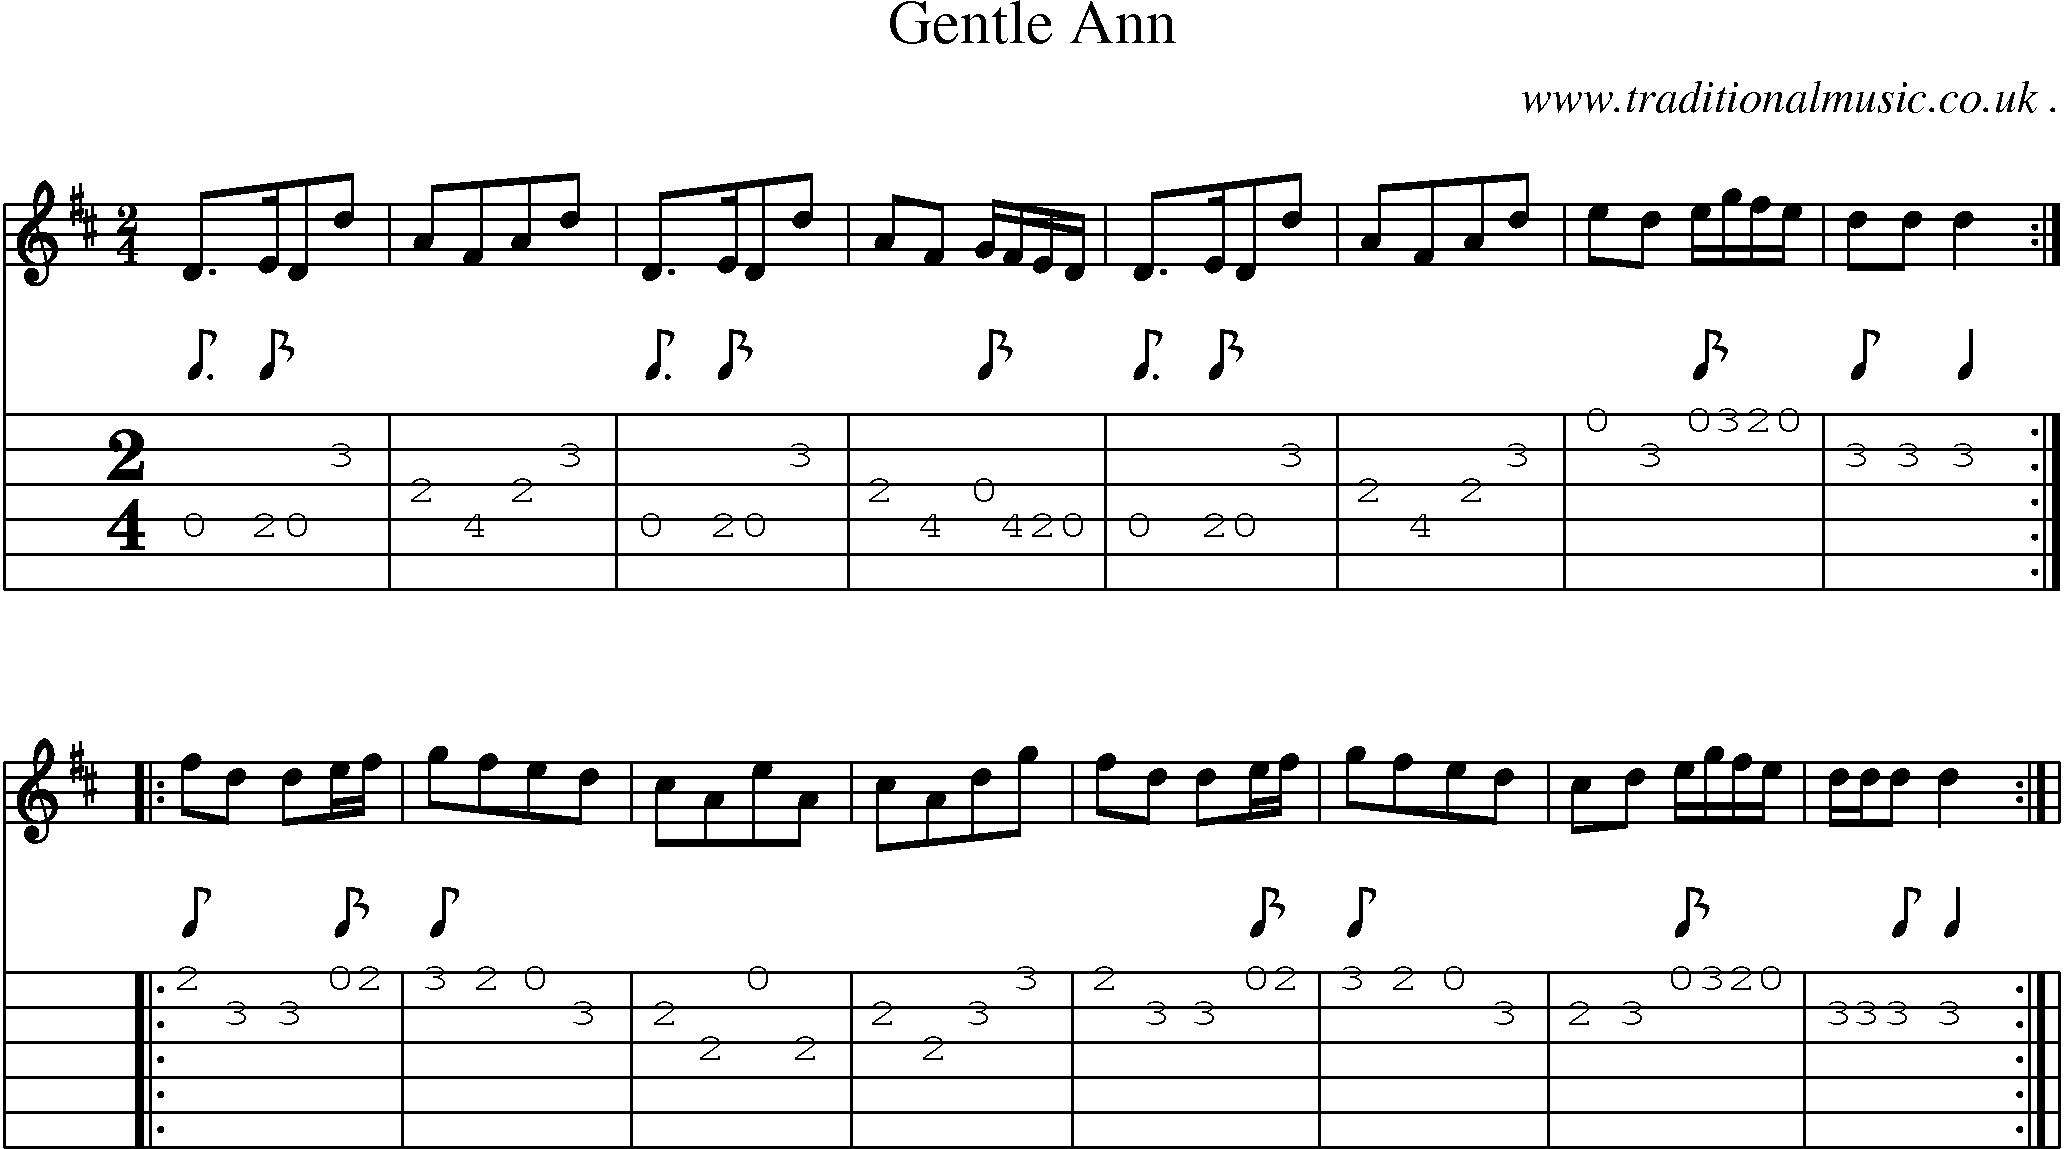 Sheet-Music and Guitar Tabs for Gentle Ann